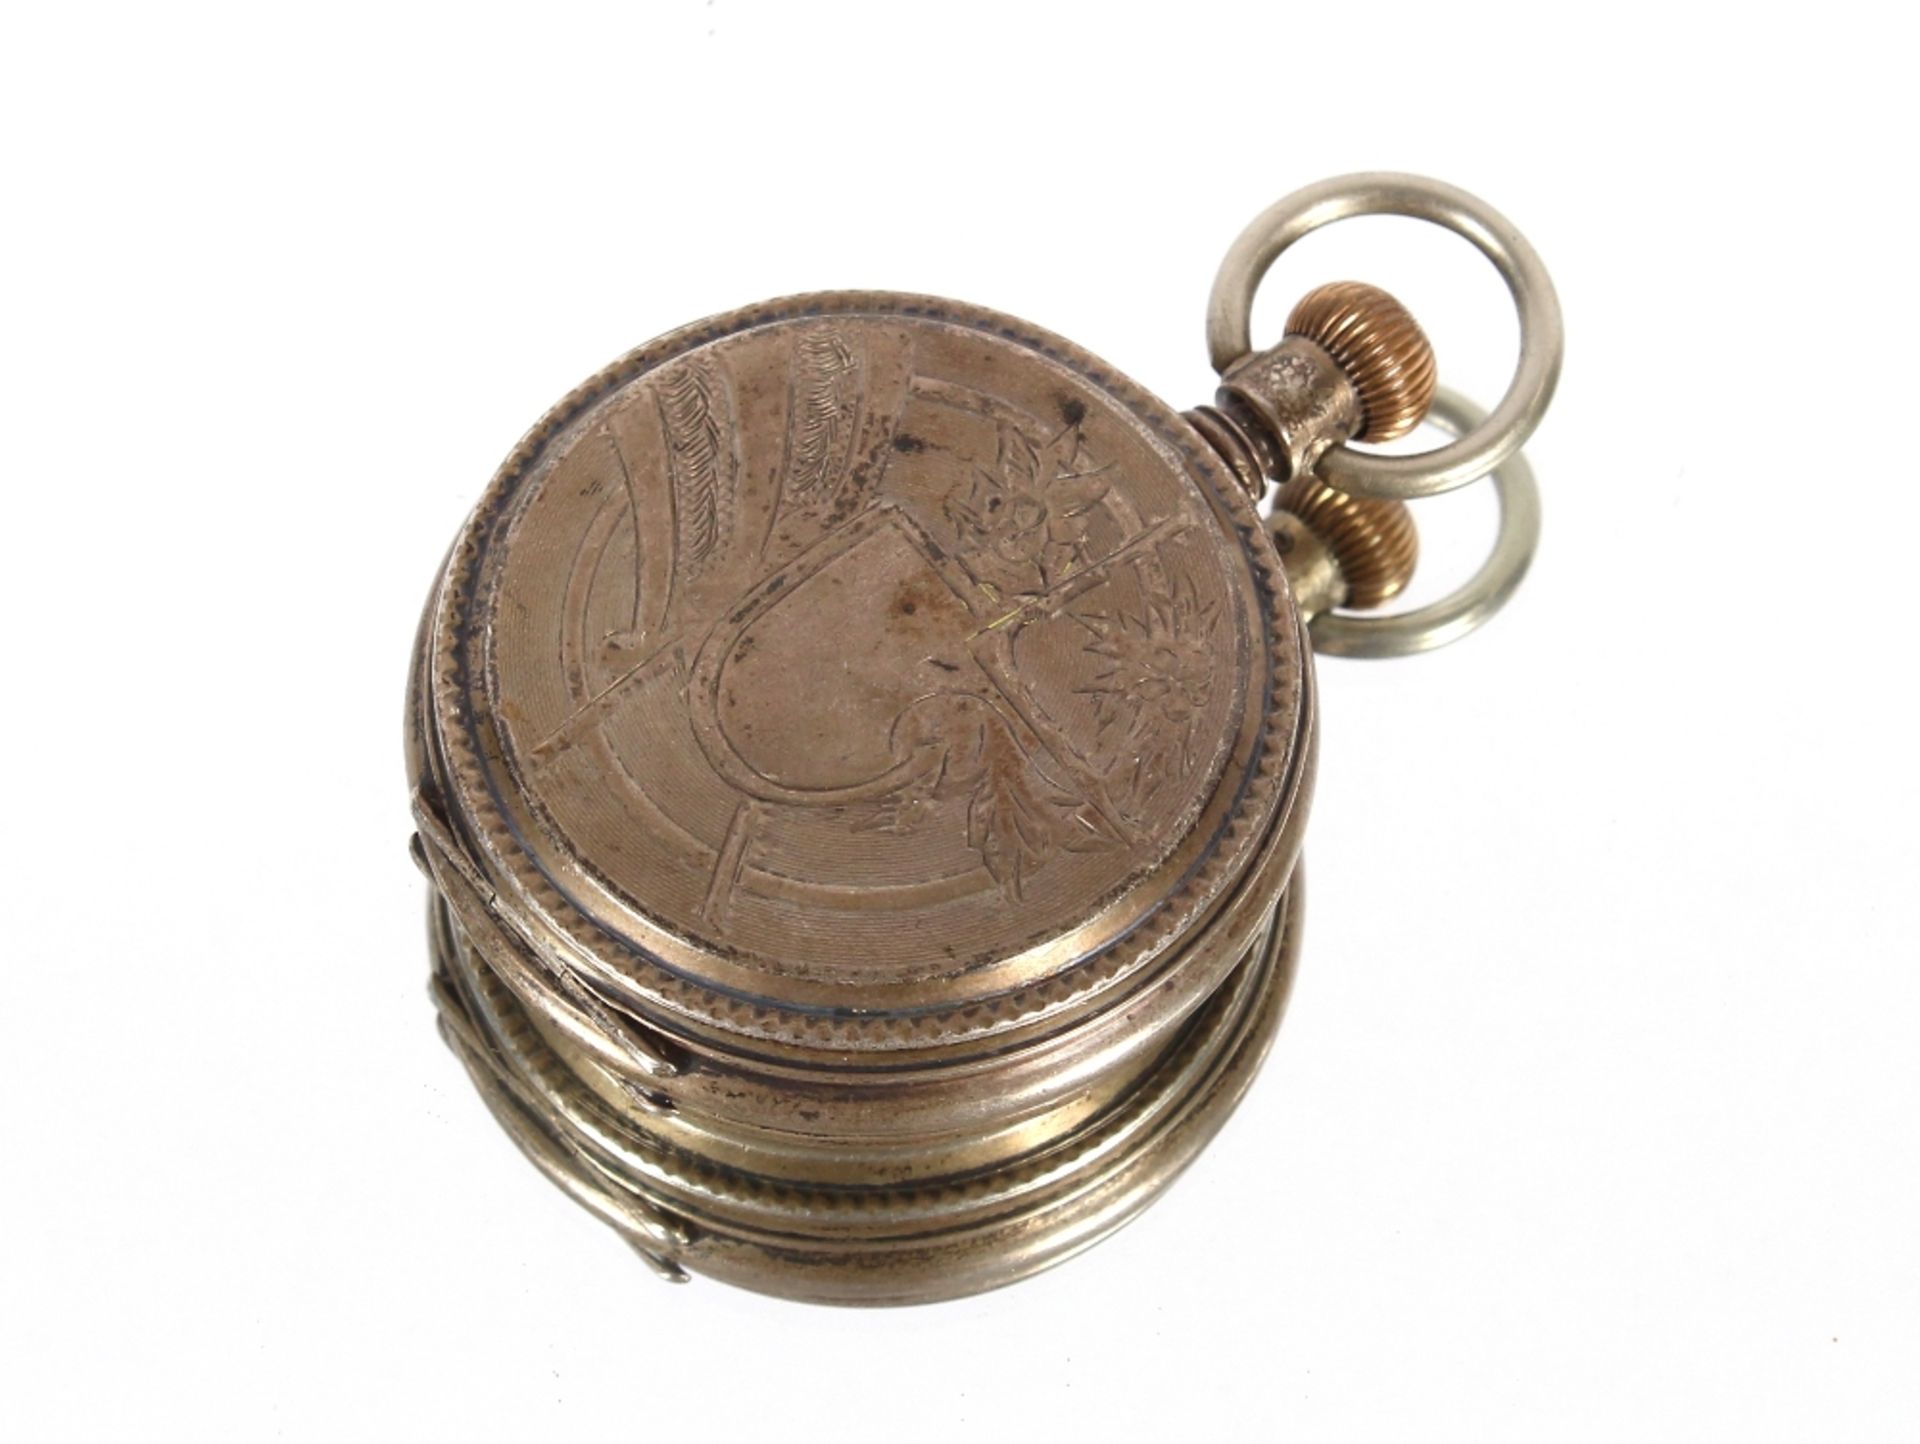 An American Standard Watch Co. of New York silver top wound pocket watch - Image 2 of 5